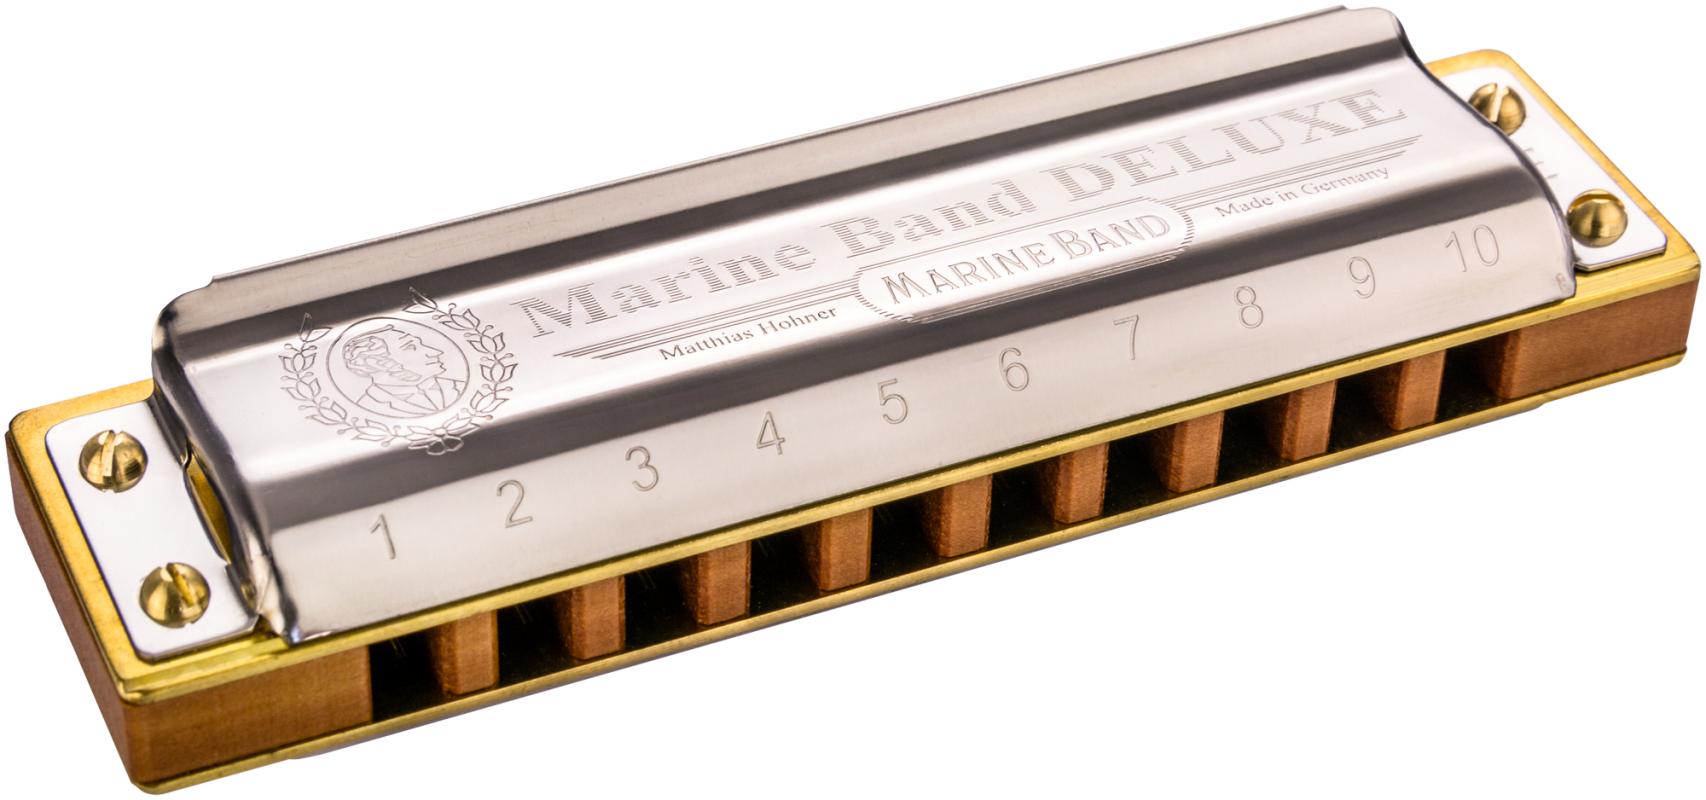 Marine-Band Deluxe G-Dur